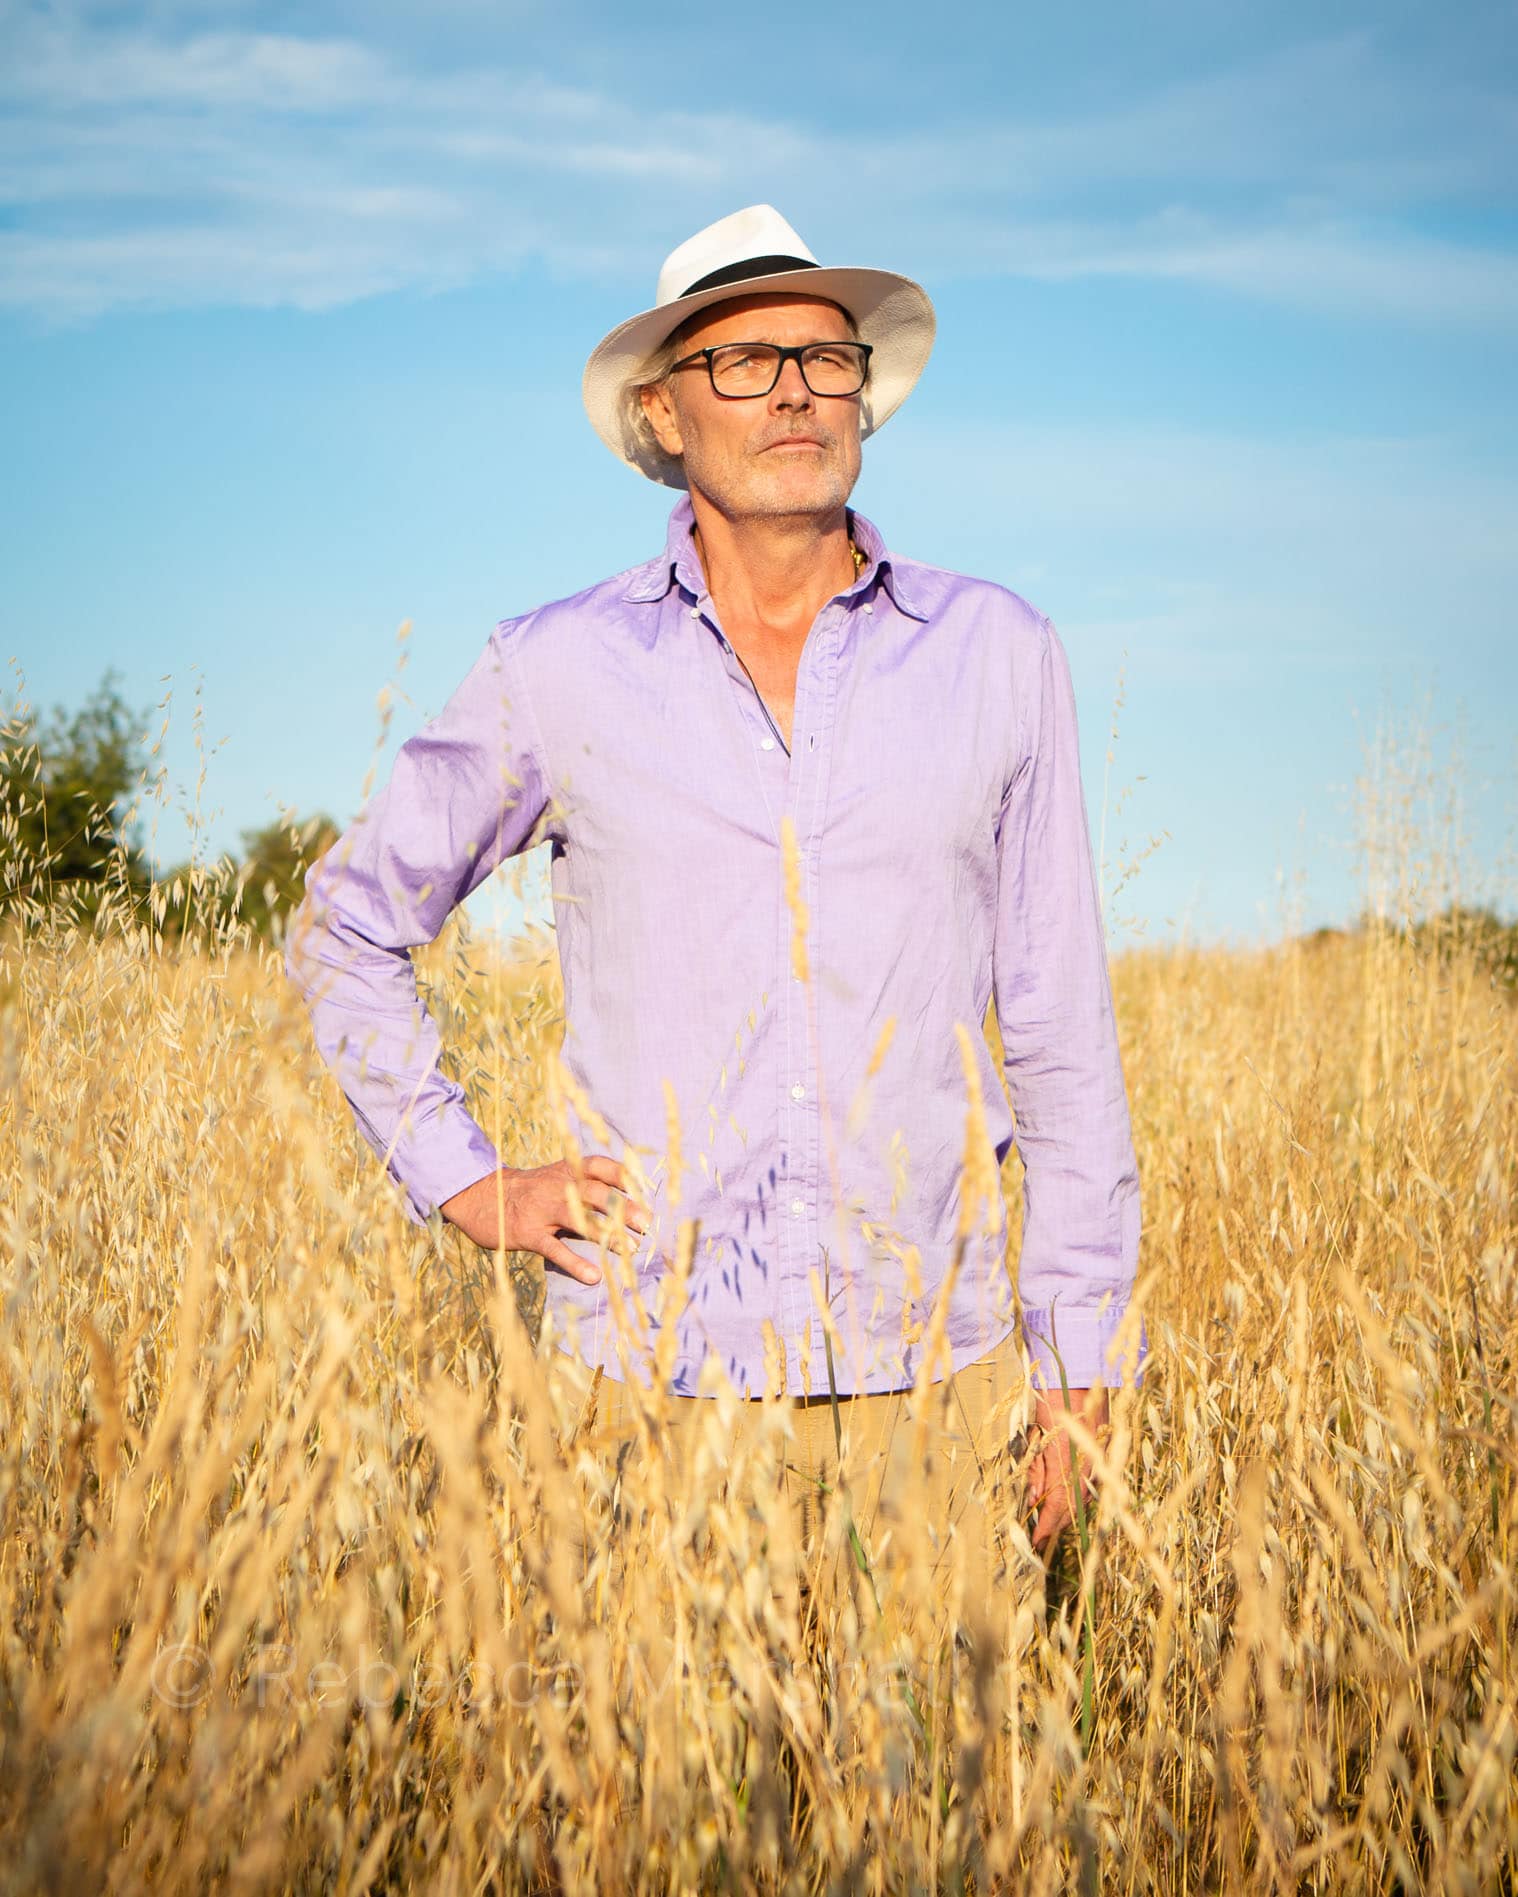 Photographic portrait of a man standing in a cornfield in a white hat